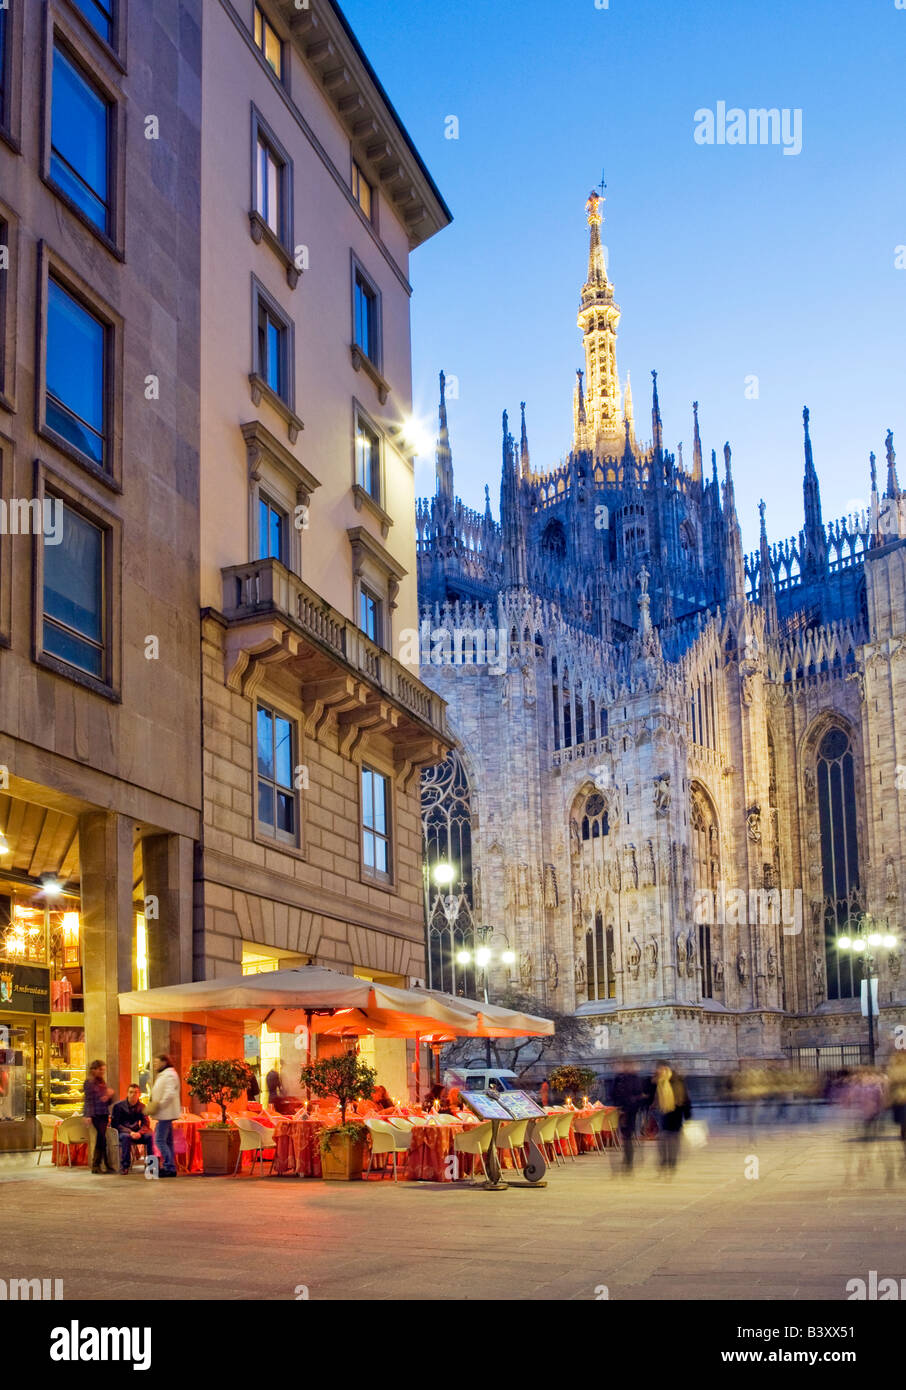 People dining at an outdoor cafe and people shopping. Piazza Del Duomo, Milan, Italy. Stock Photo